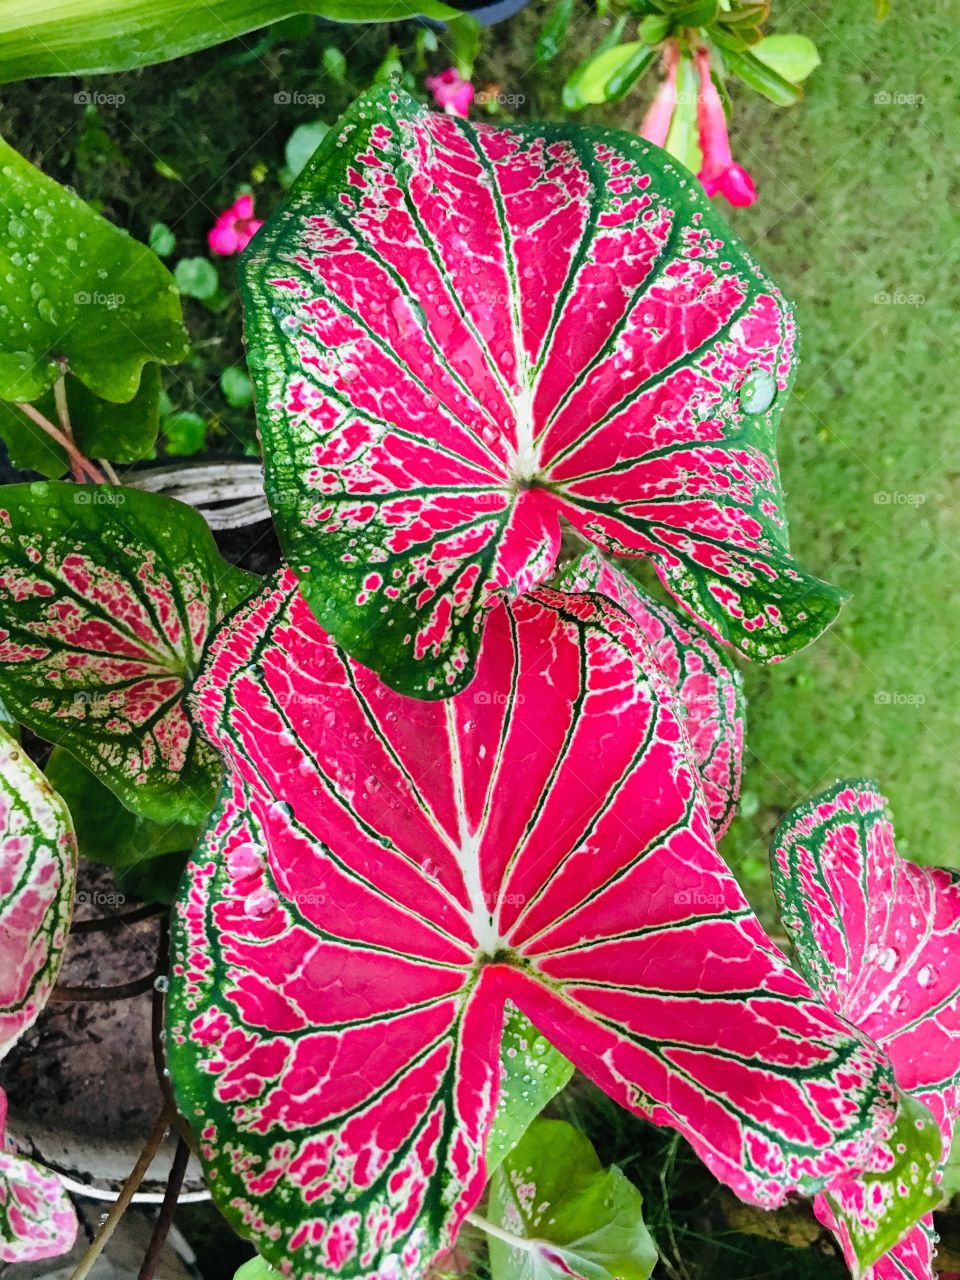 The color and beauty of the color Bon leaves